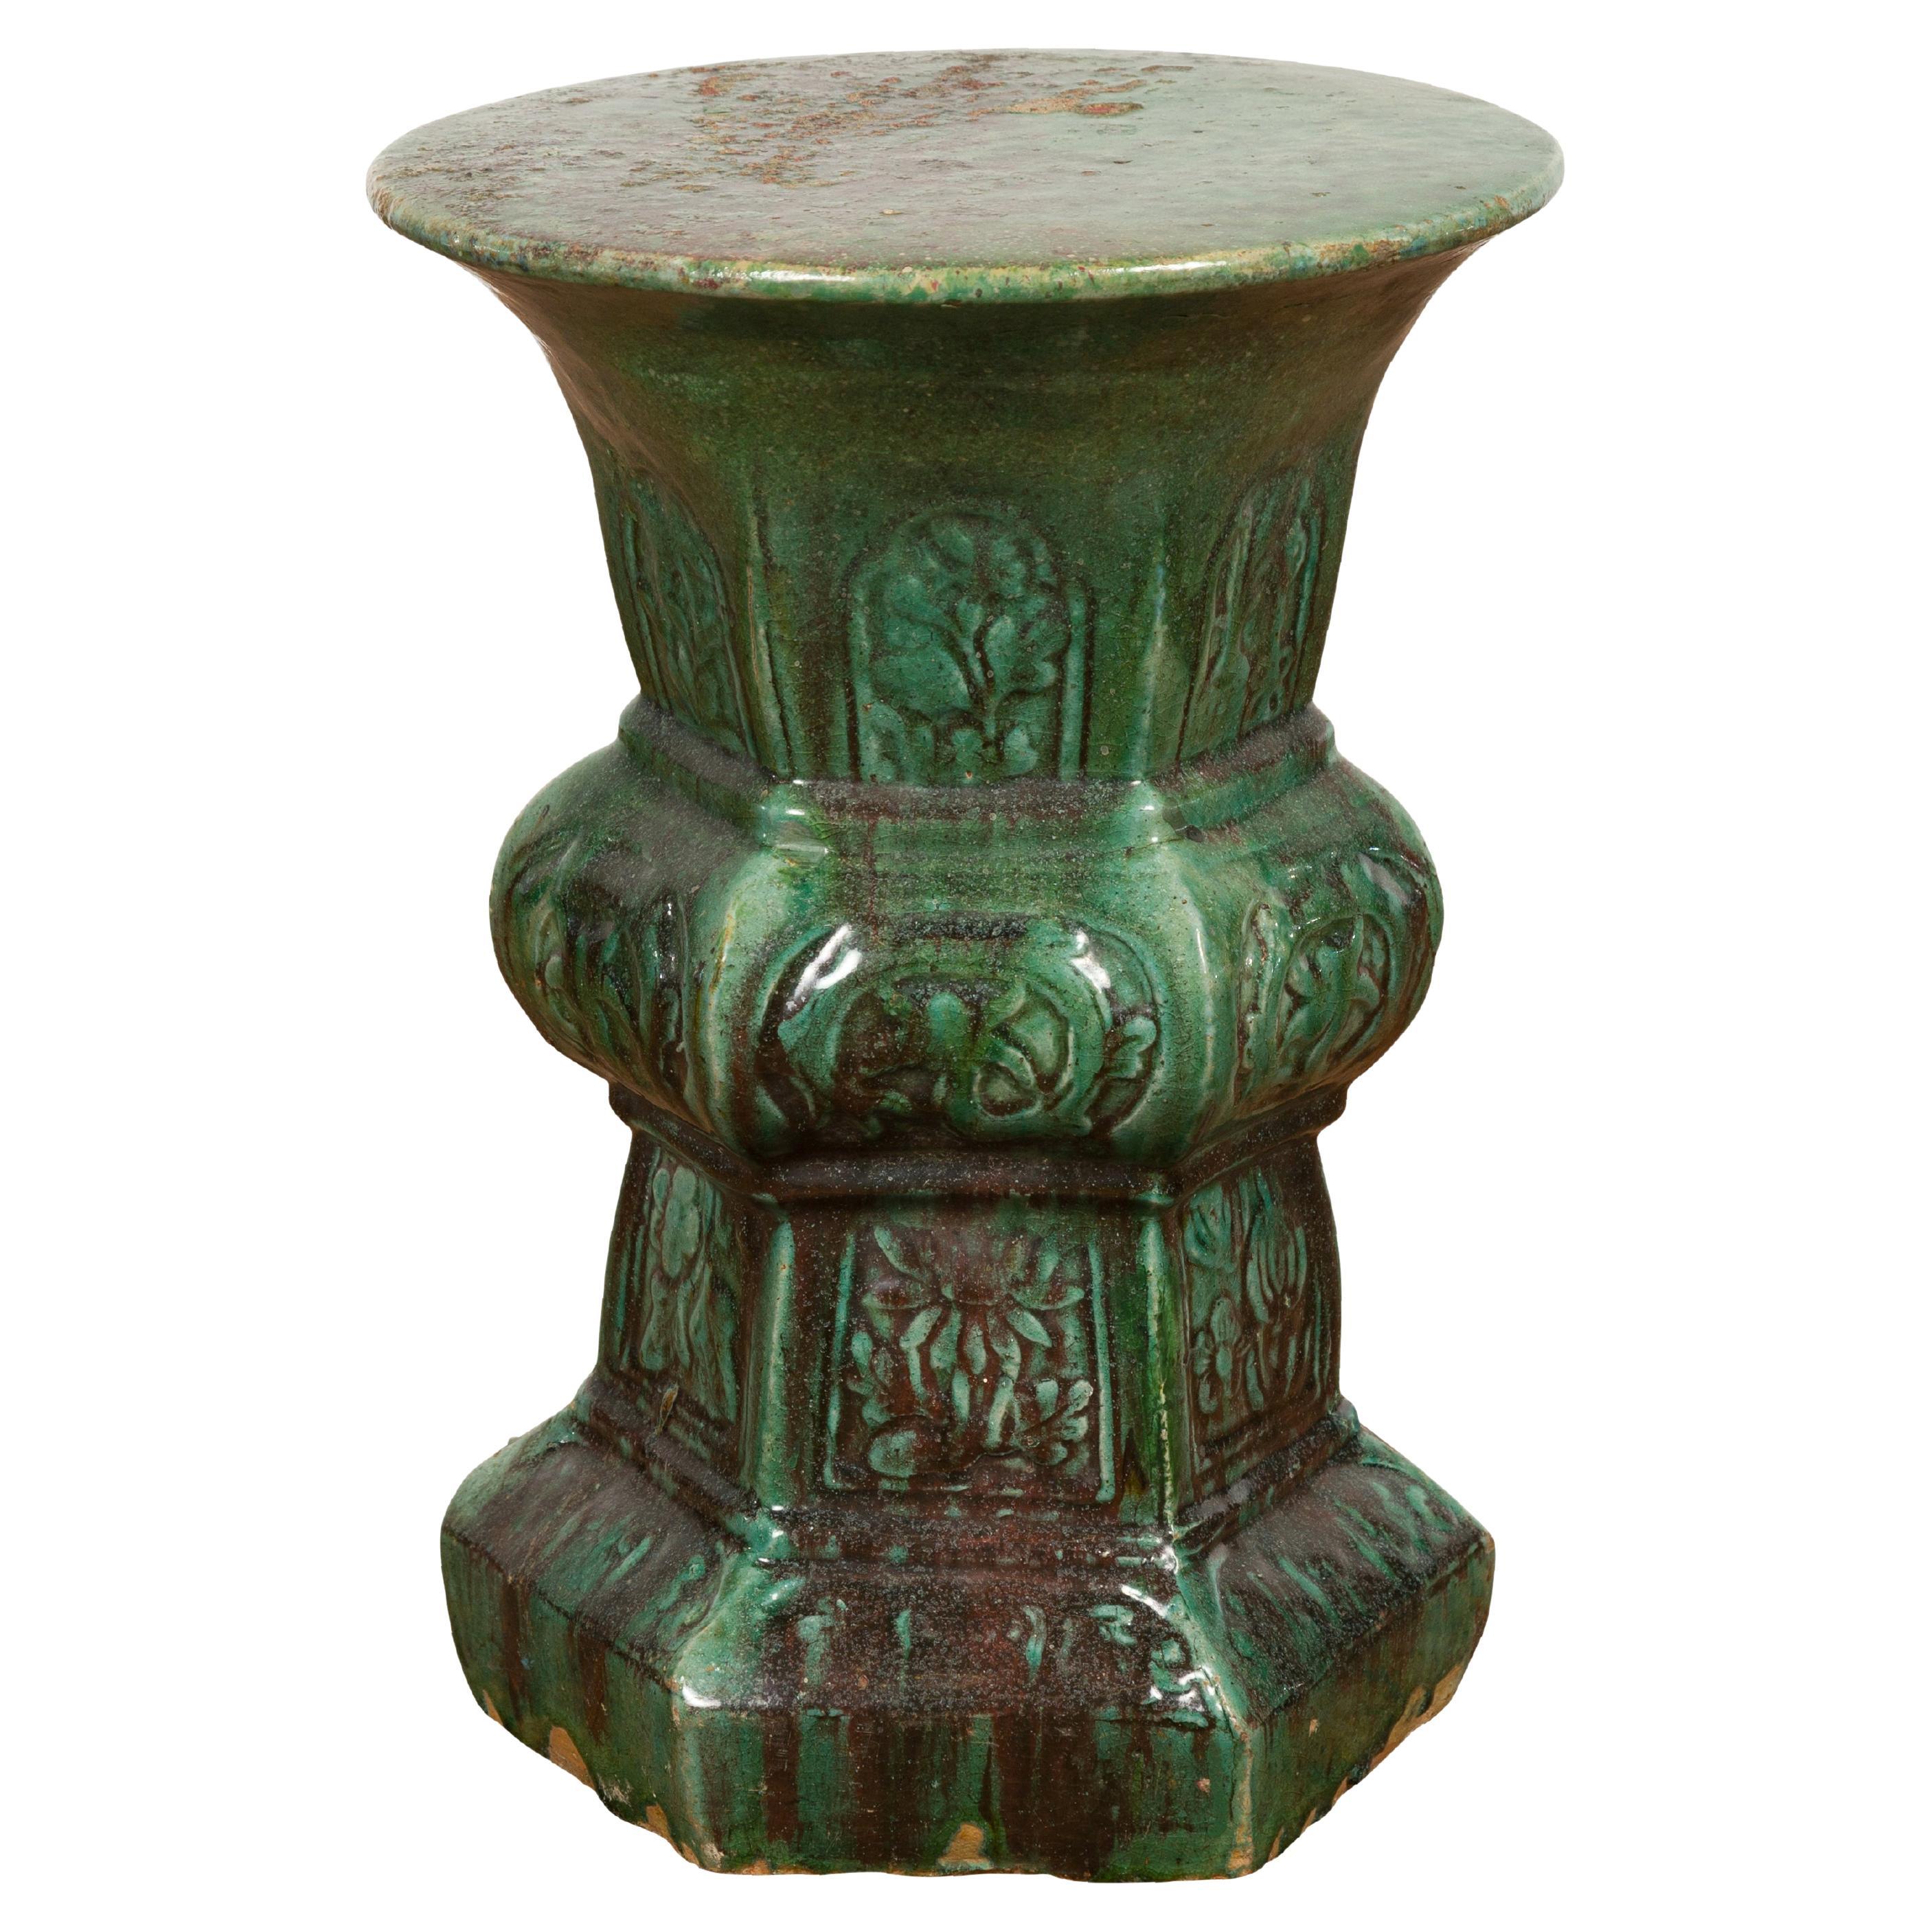 Annamese 19th Century Green Glazed Hourglass Garden Seat with Floral Décor